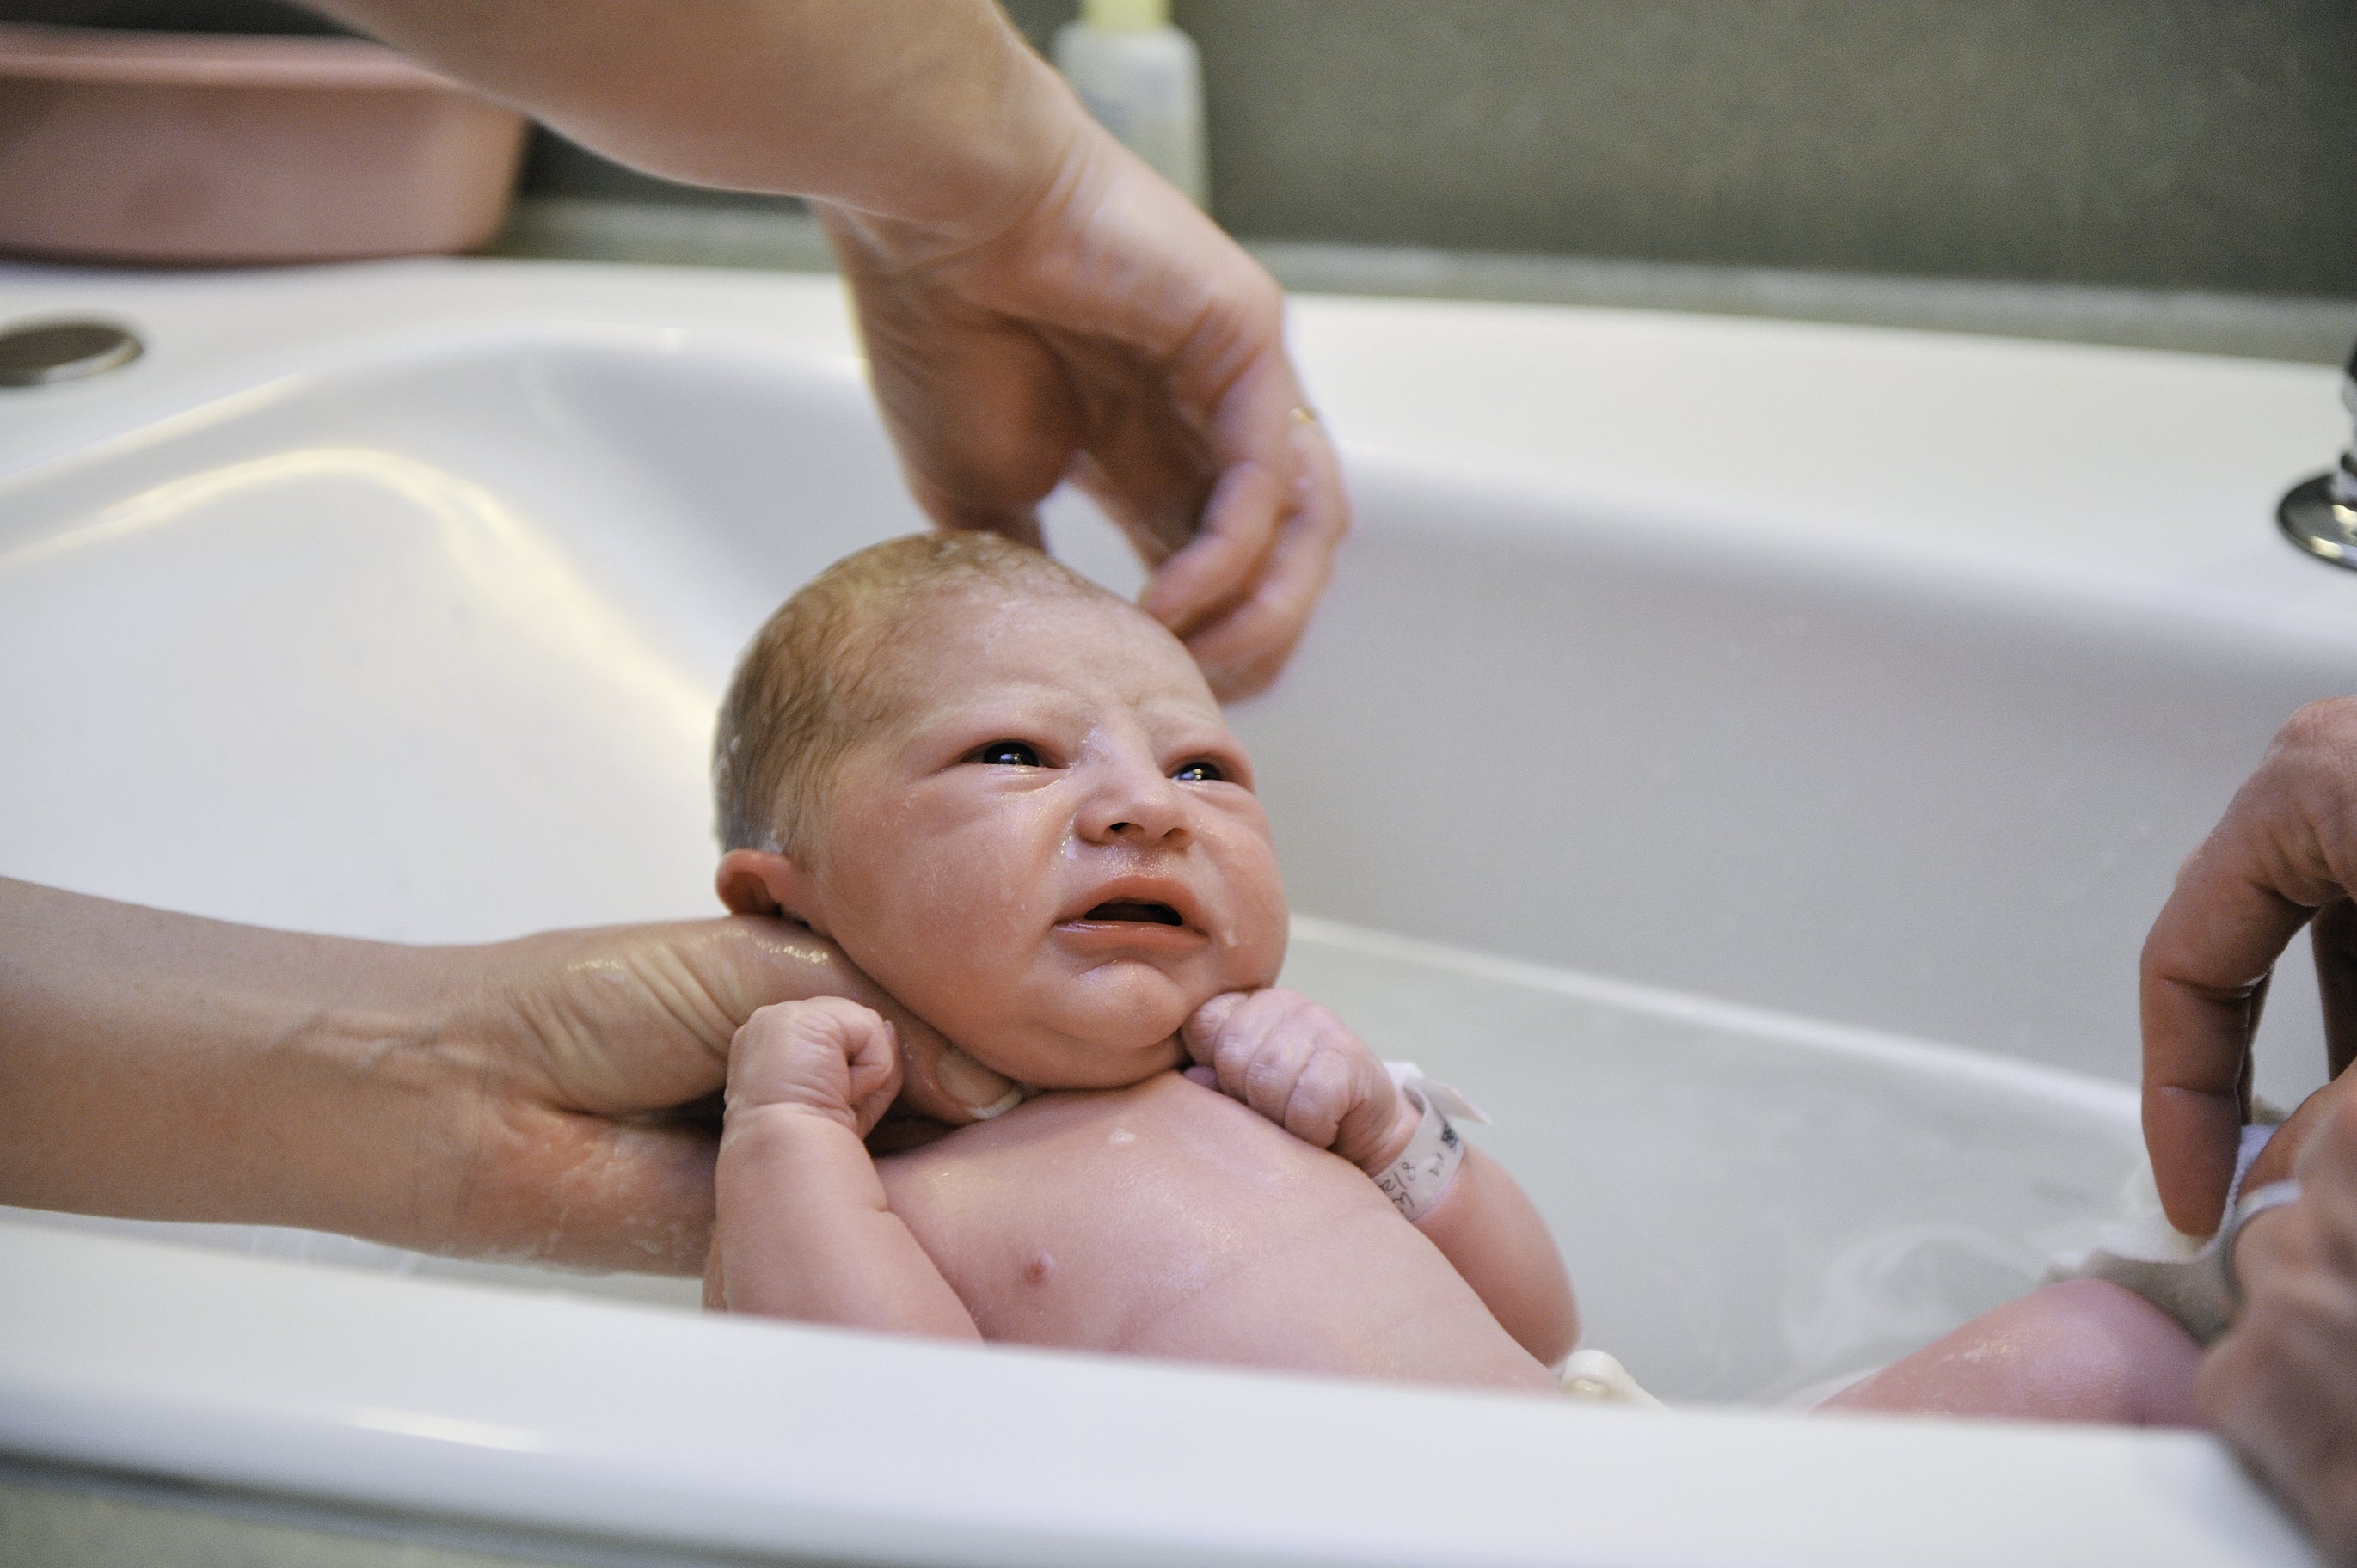 A newborn baby being given a bath 24 hours after birth by a nurse and a parent